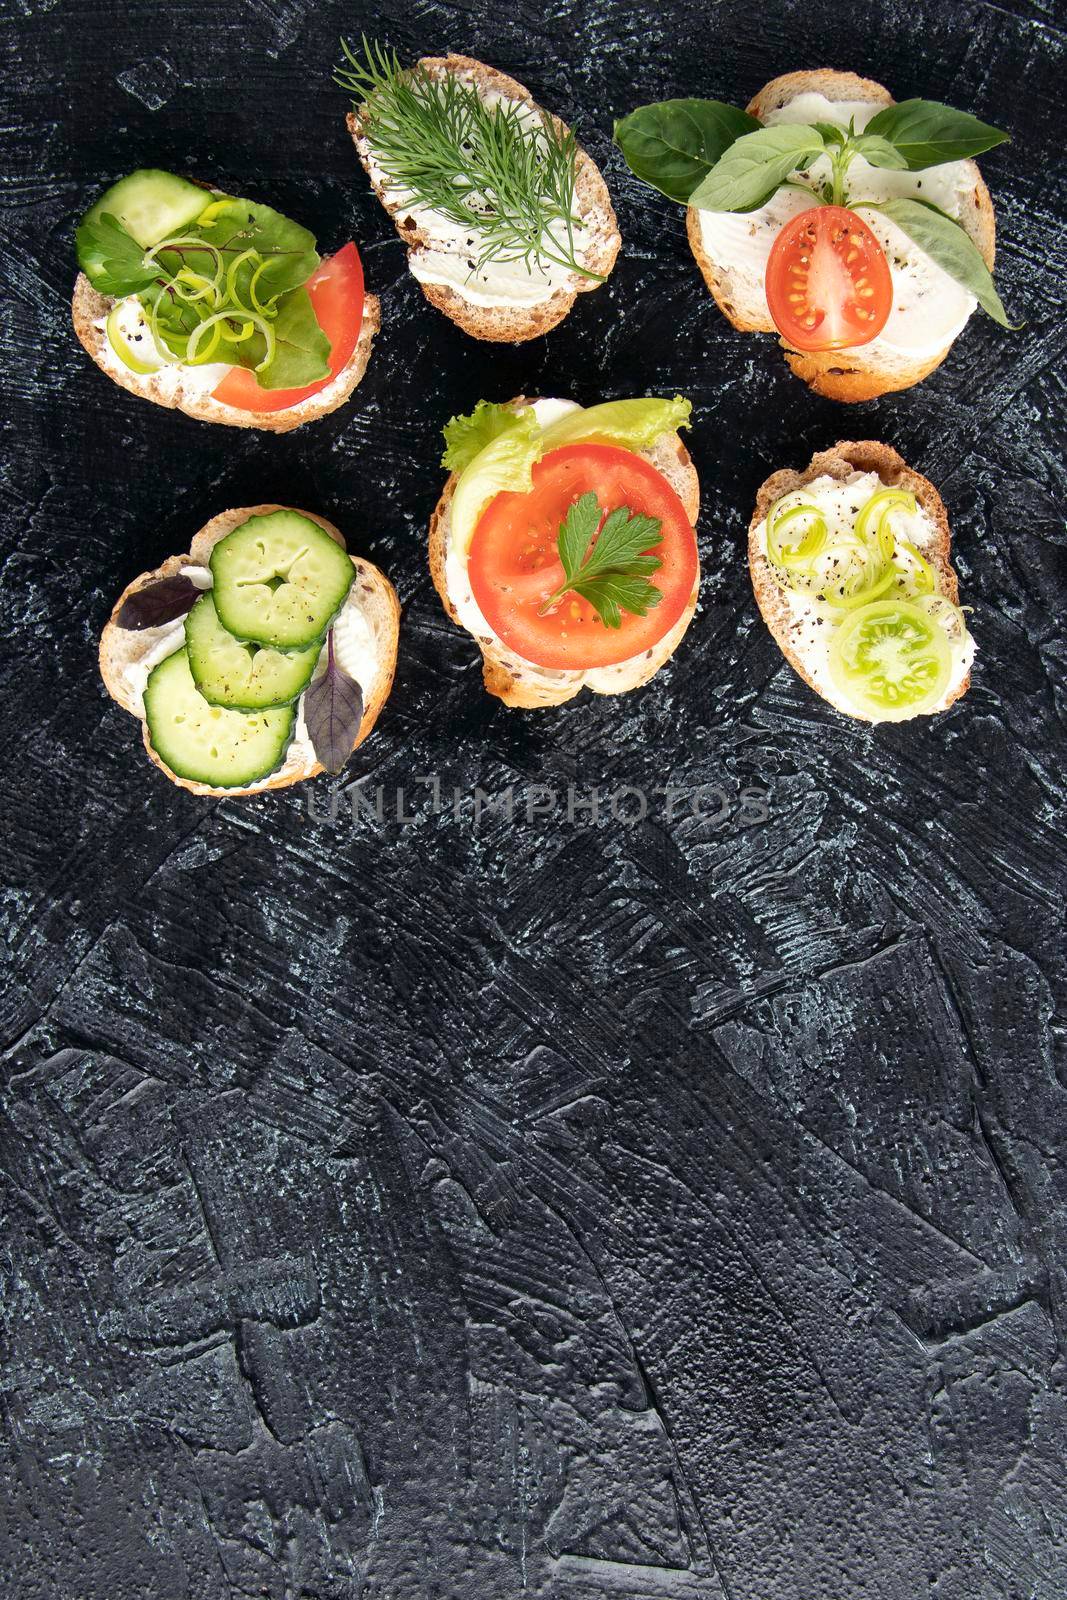 vertical photo with various vegetable sandwiches with cream cheese, tomatoes, dill, cucumbers, leeks and basil.serving vegetarian sandwiches for appetizers on black textured background. by Leoschka